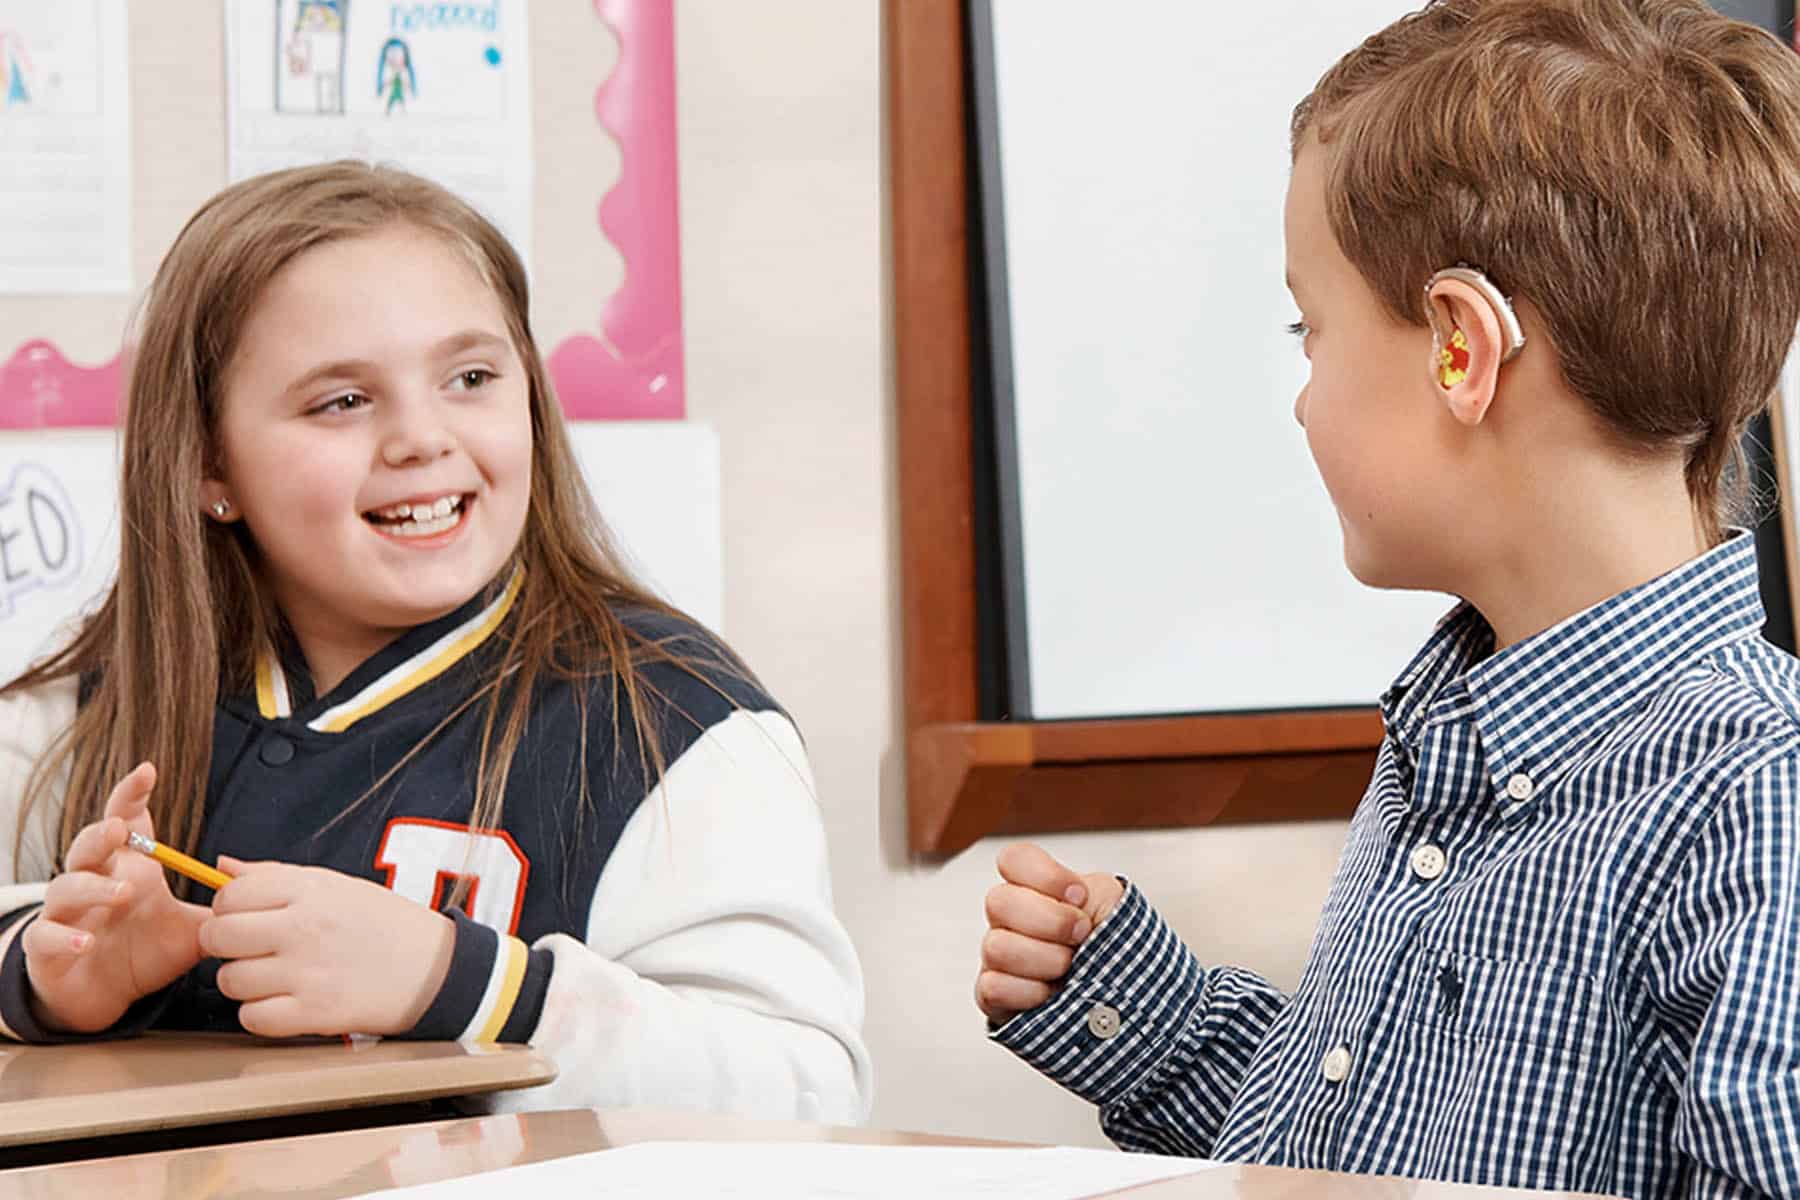 Talk about success: Building conversation skills in children who are deaf and hard of hearing